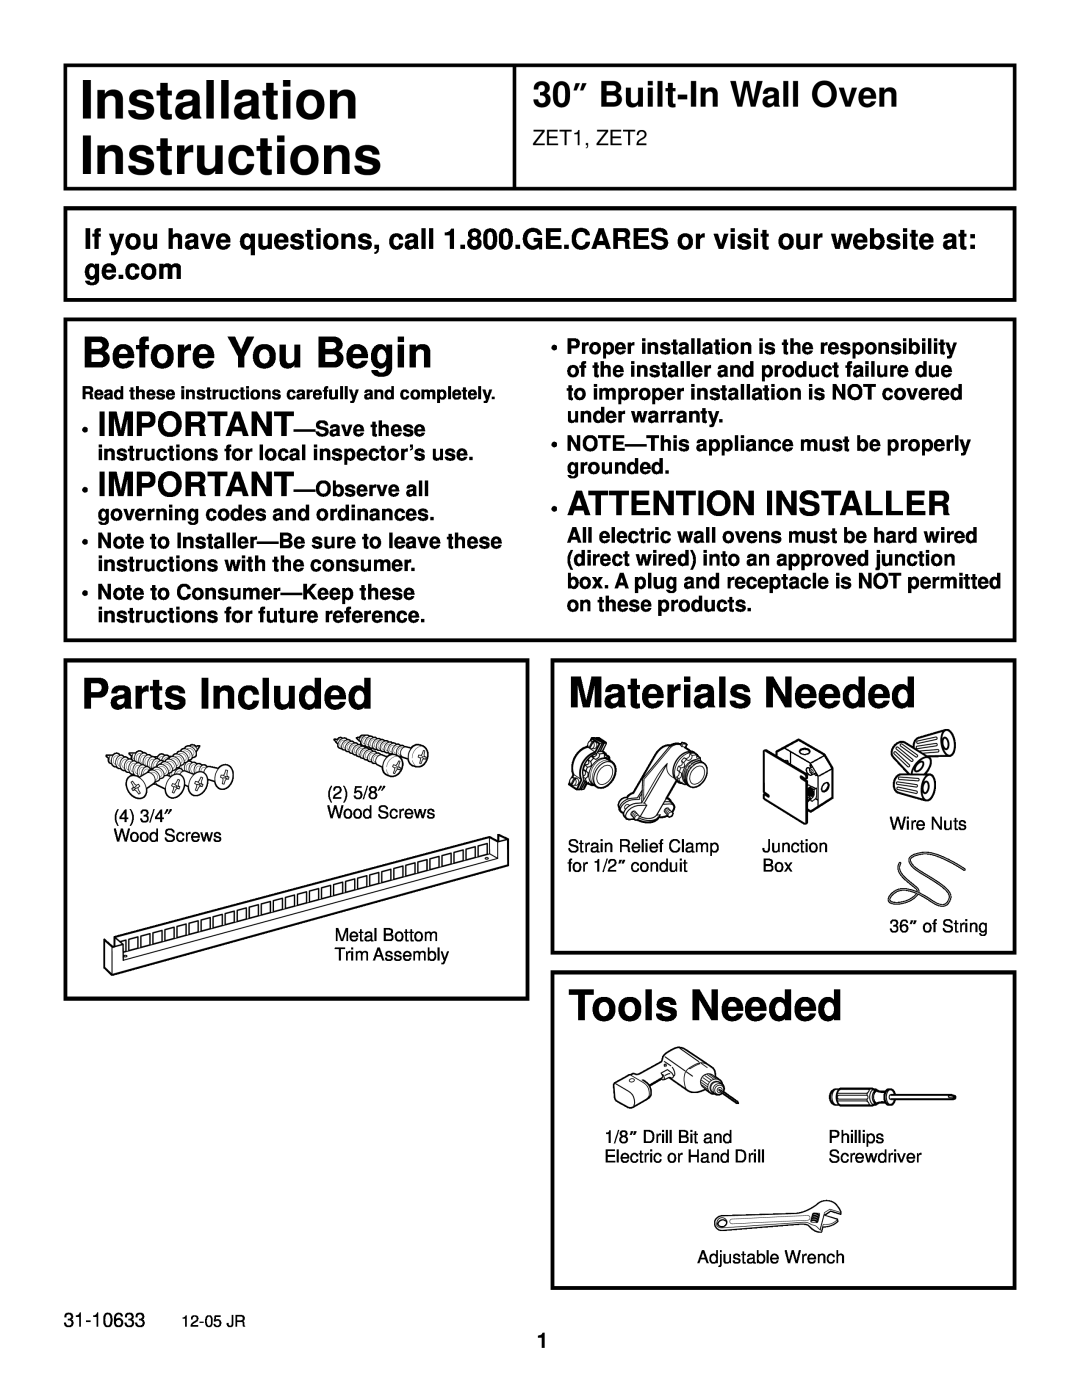 GE ZET1, ZET2 installation instructions Installation, Instructions, Before You Begin, Parts Included, Materials Needed 